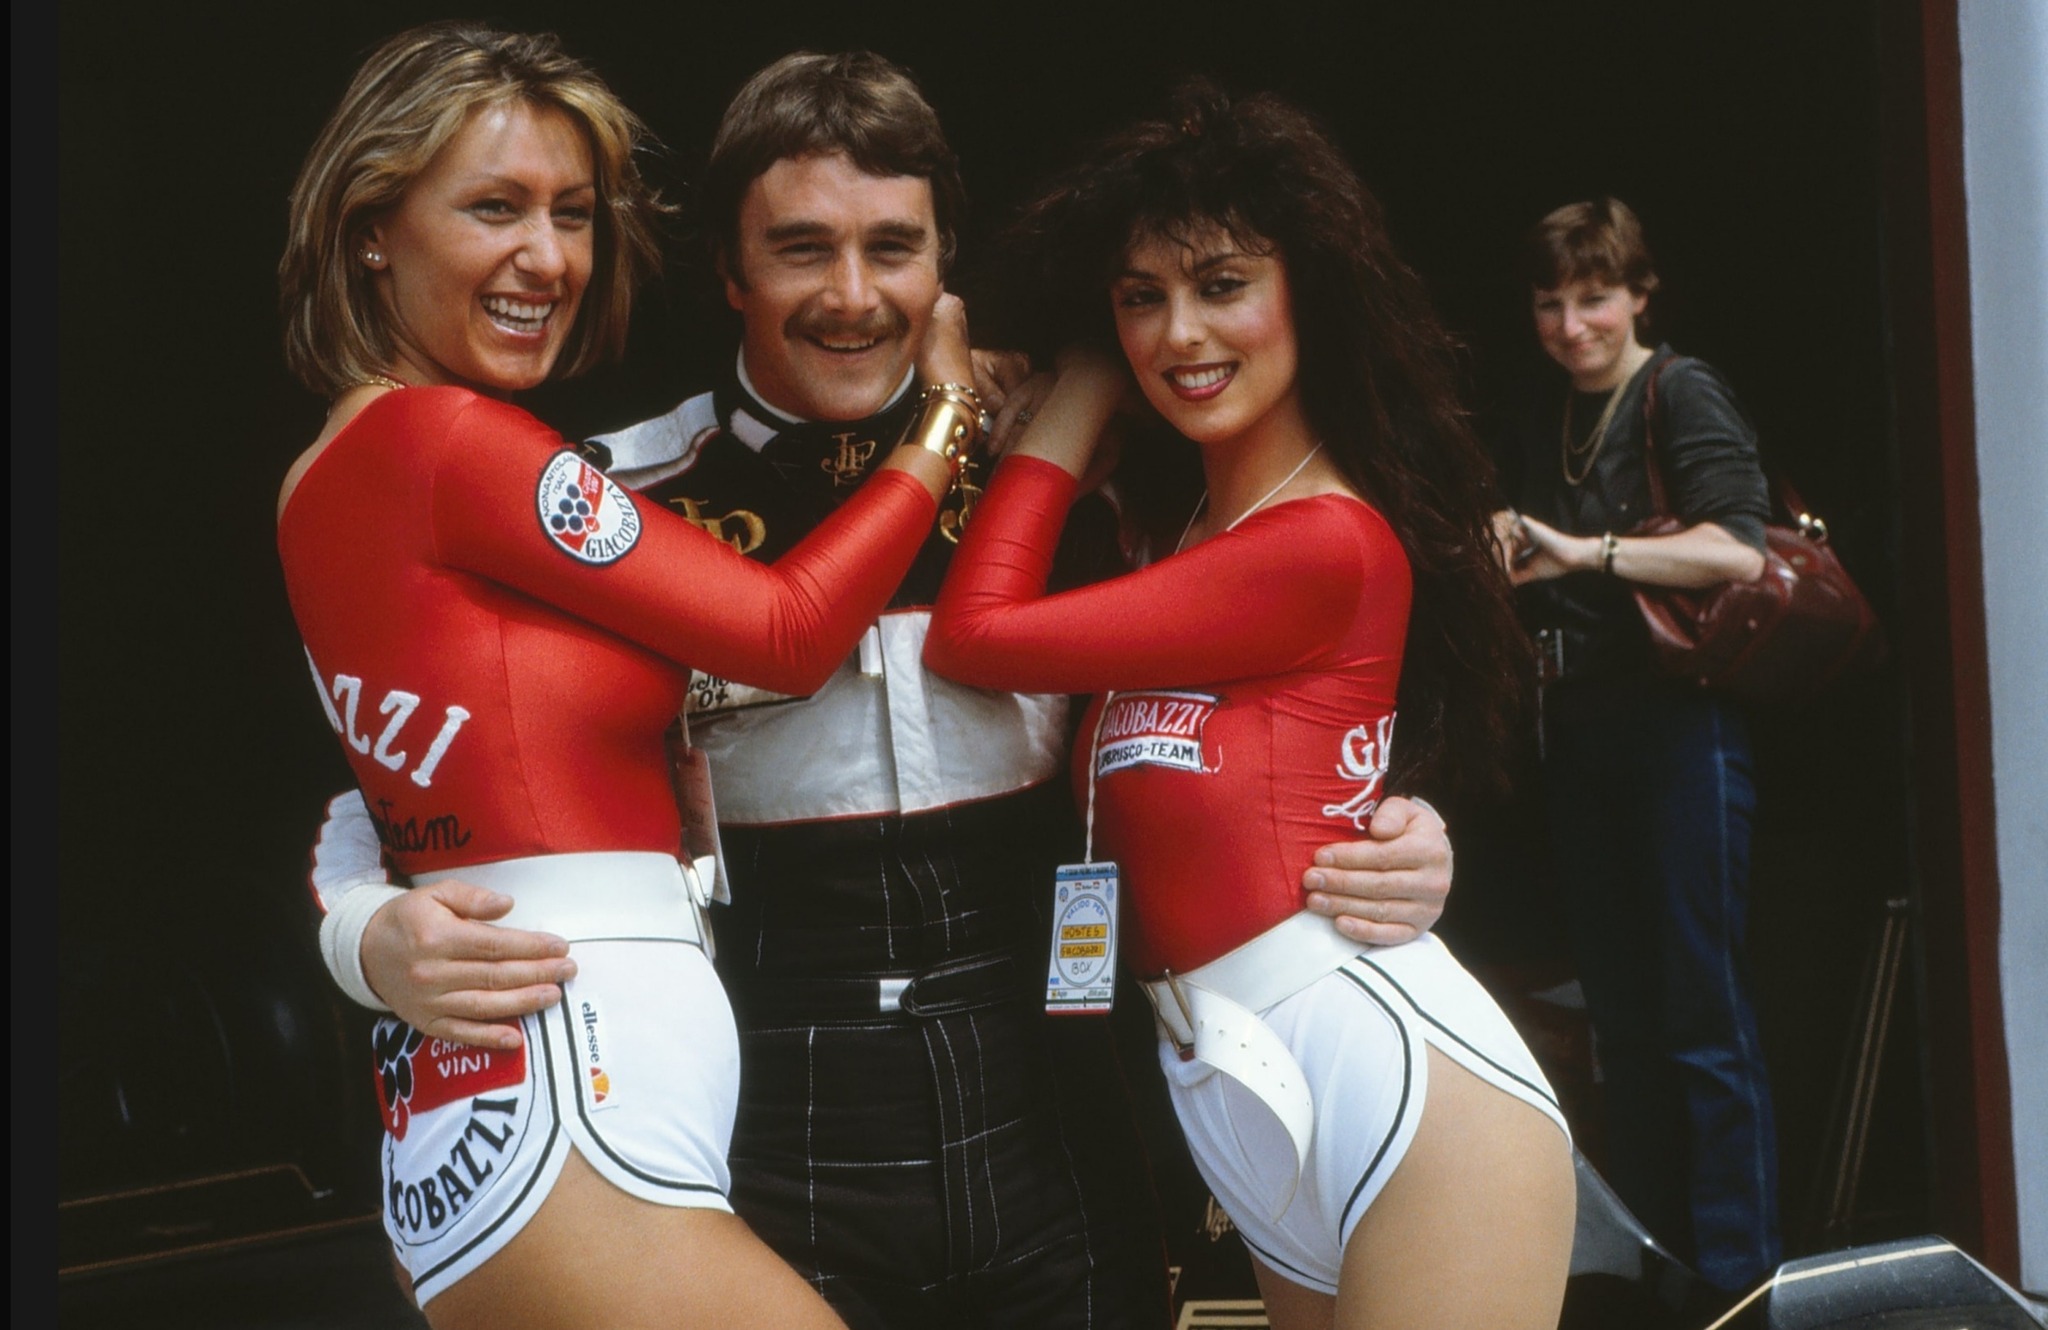 Nigel Mansell with two Giacobazzi Lambrusco girls at Imola on 01 May 1983.